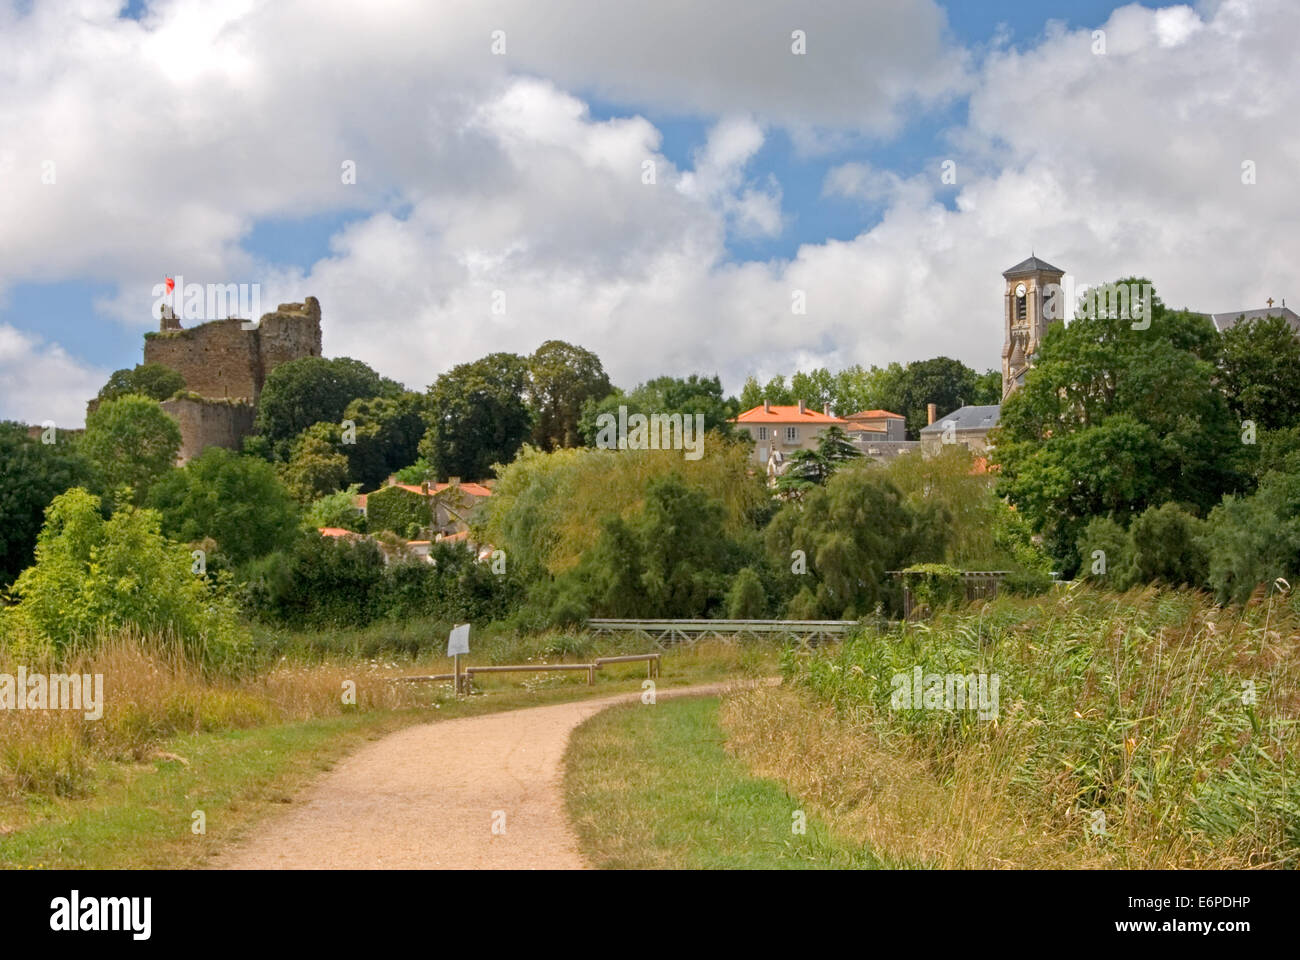 Talmont St Hilaire with its ruined castle and ornate town church. The castle was once home to Richard the Lionheart. Stock Photo